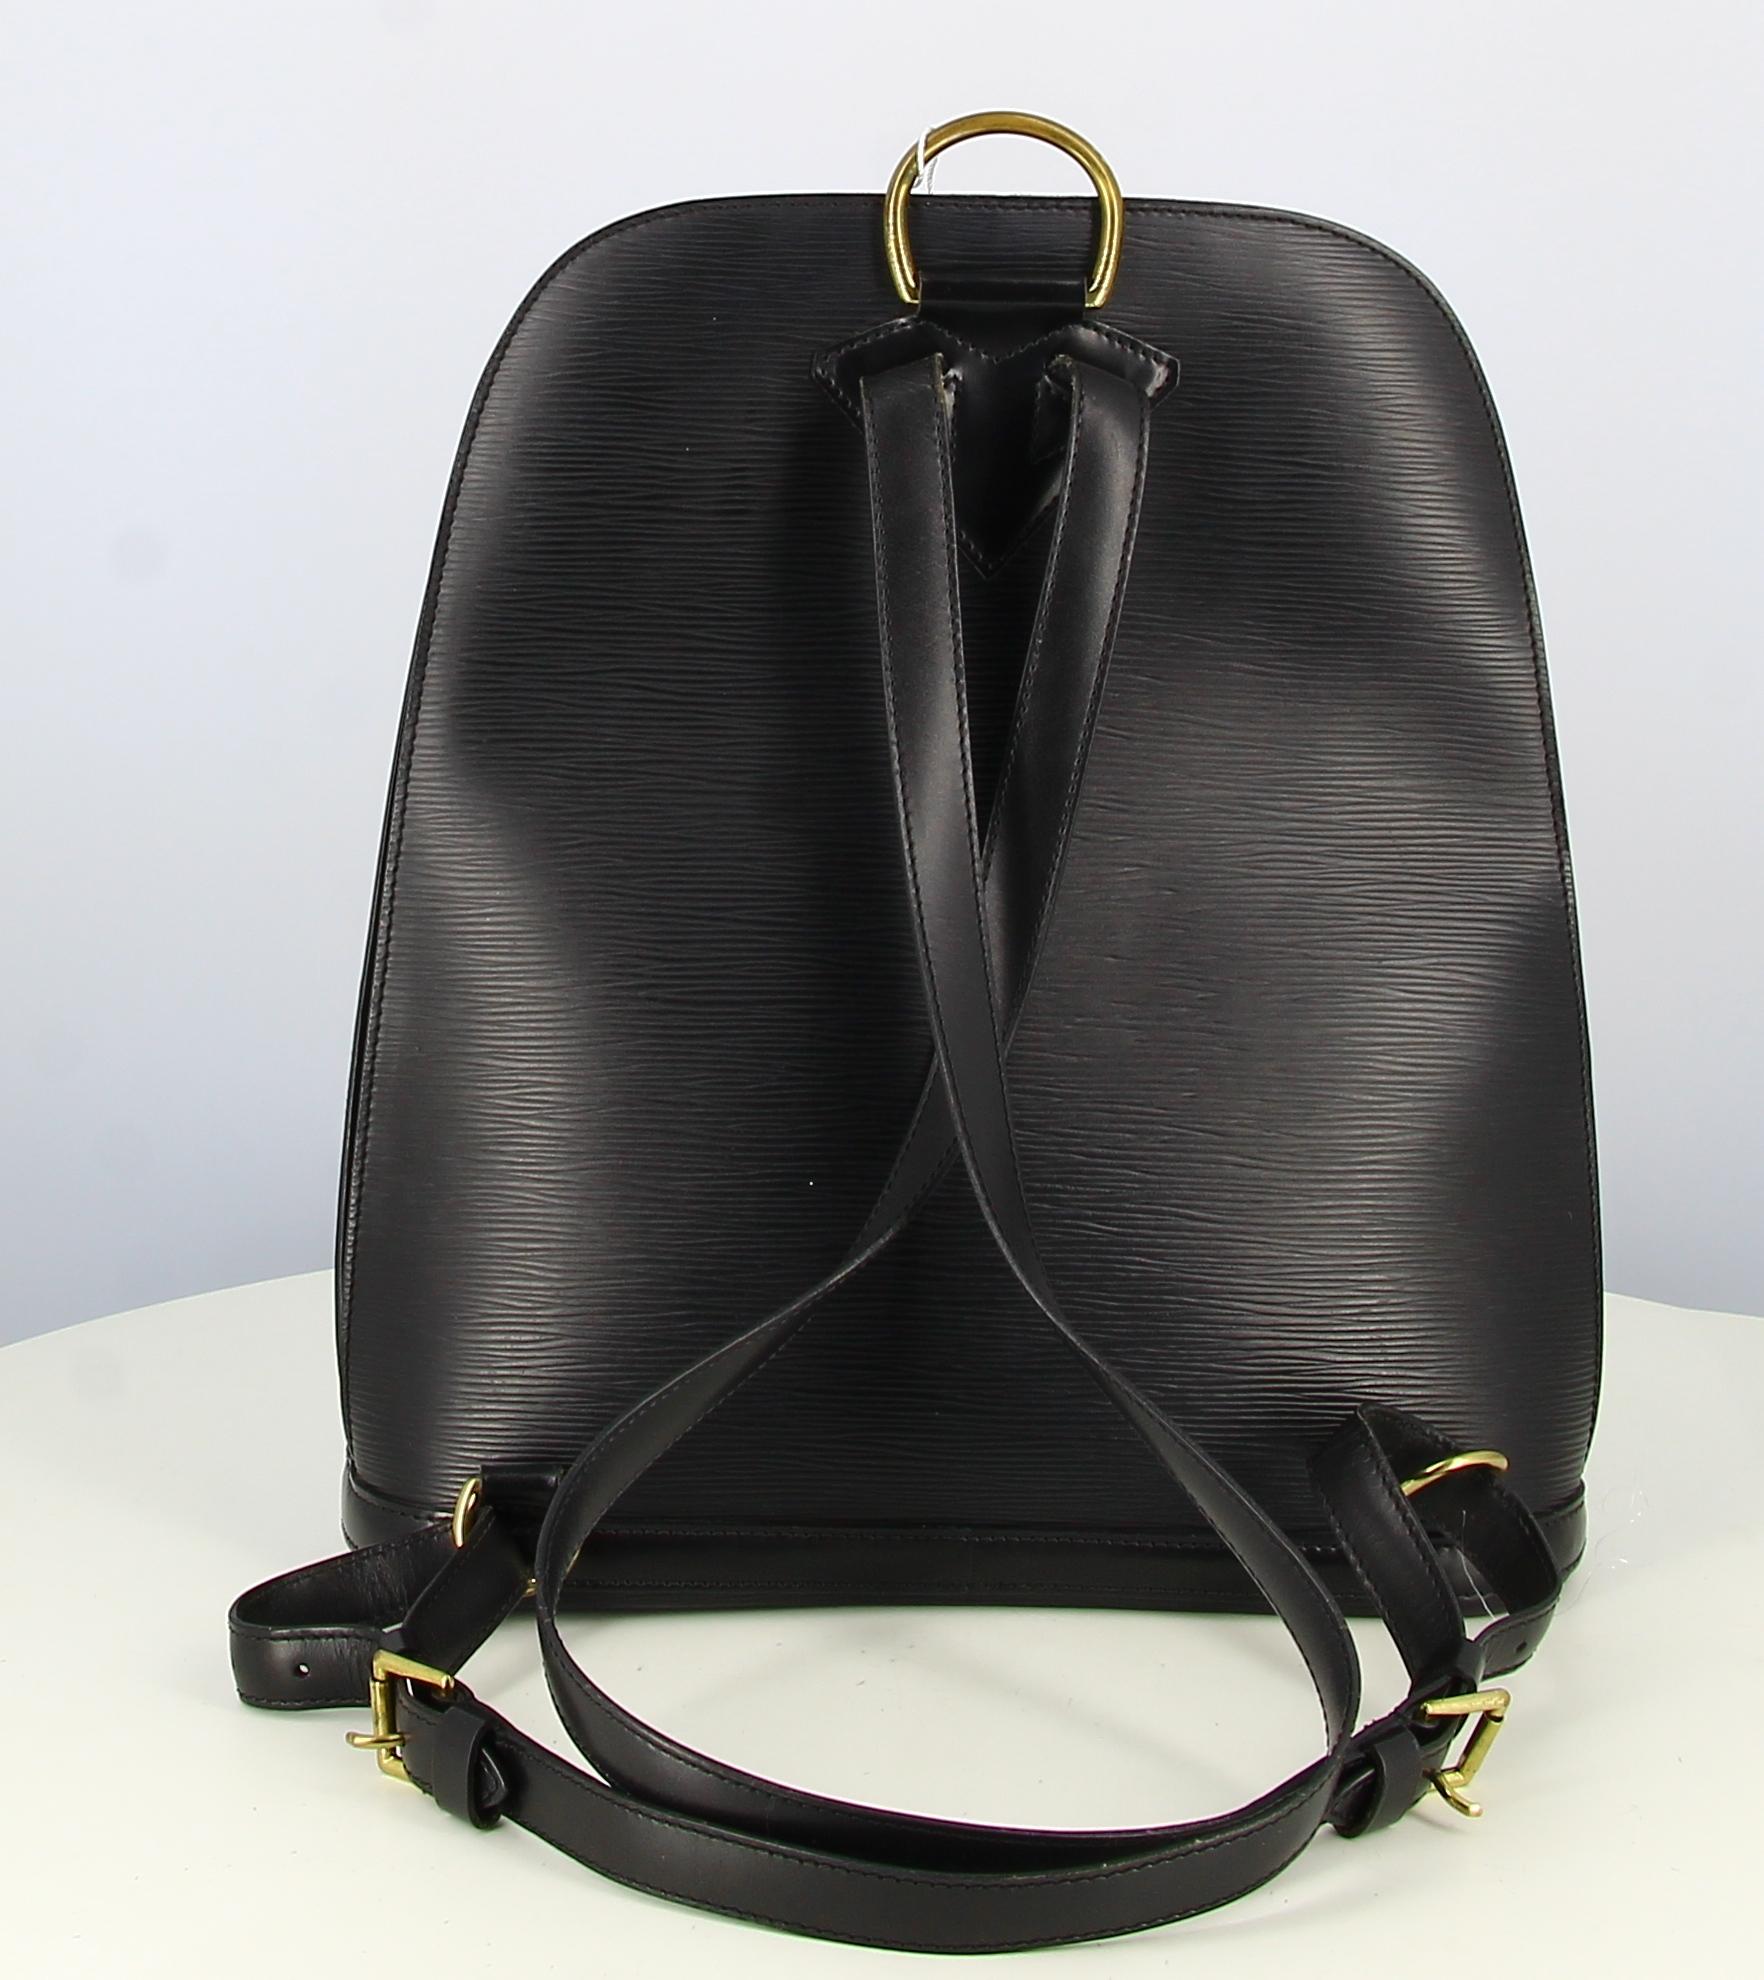 1996 Louis Vuitton Gobelins Backpack Leather Epi Black

- Very good condition. Shows signs of wear over time.
- Louis Vuitton Backpack
- Black epi leather
- Two black leather straps
